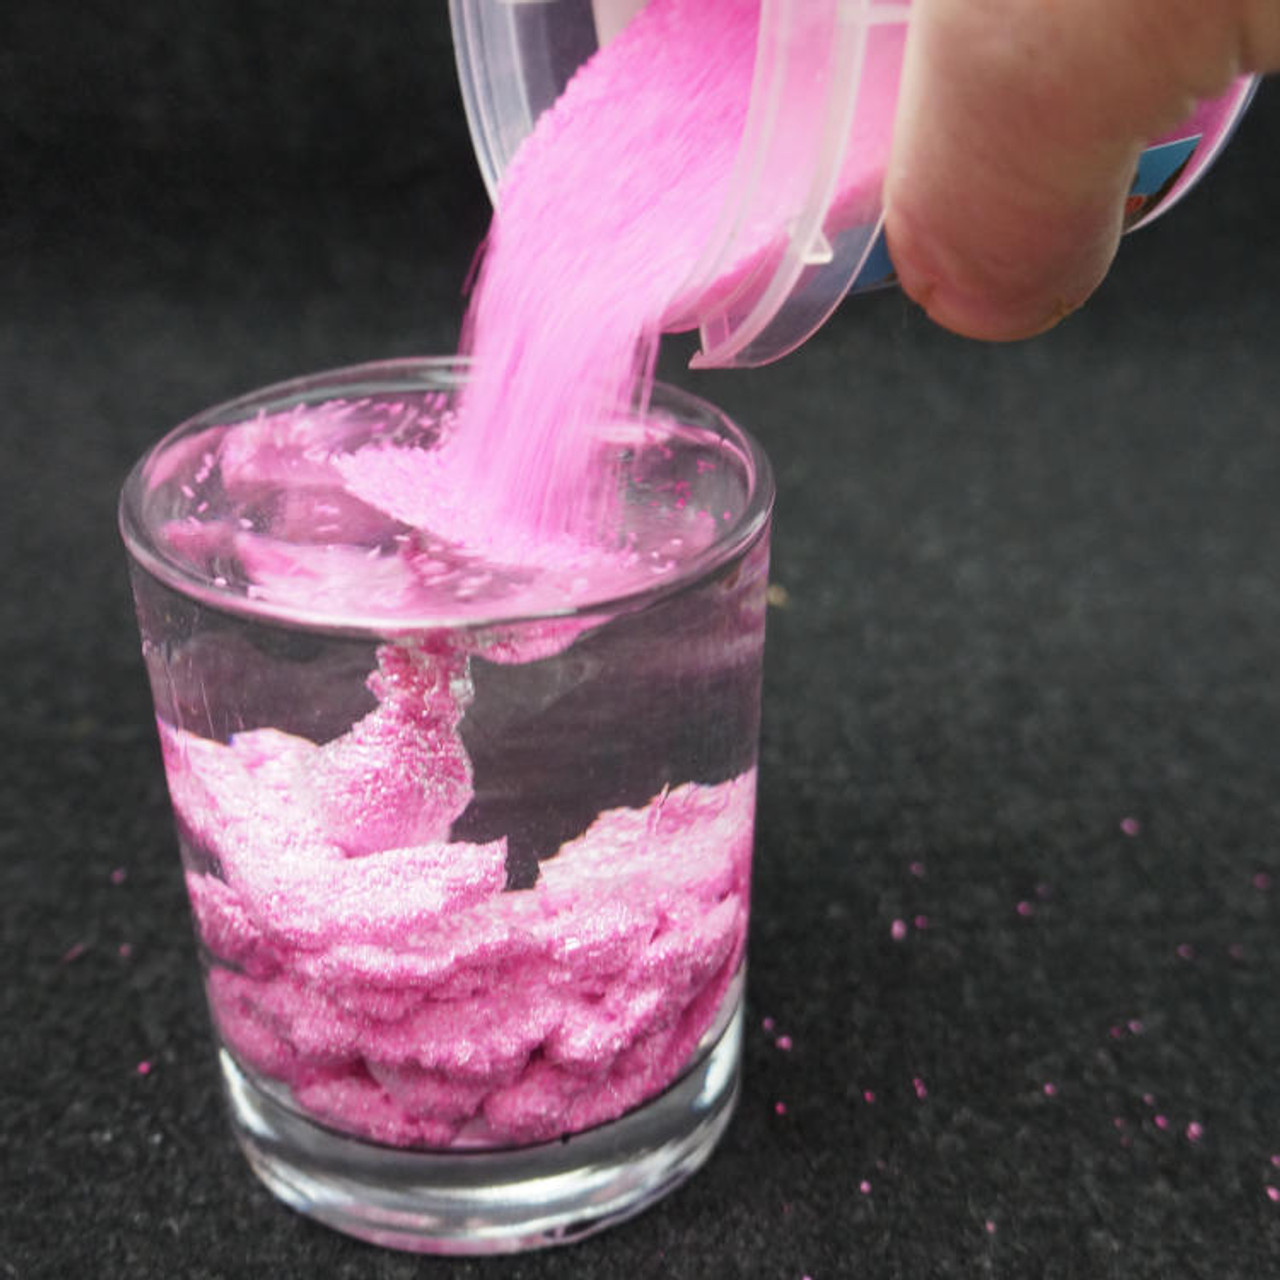 Magic Sand  Hydrophobic Sand for Your Classroom from Educational